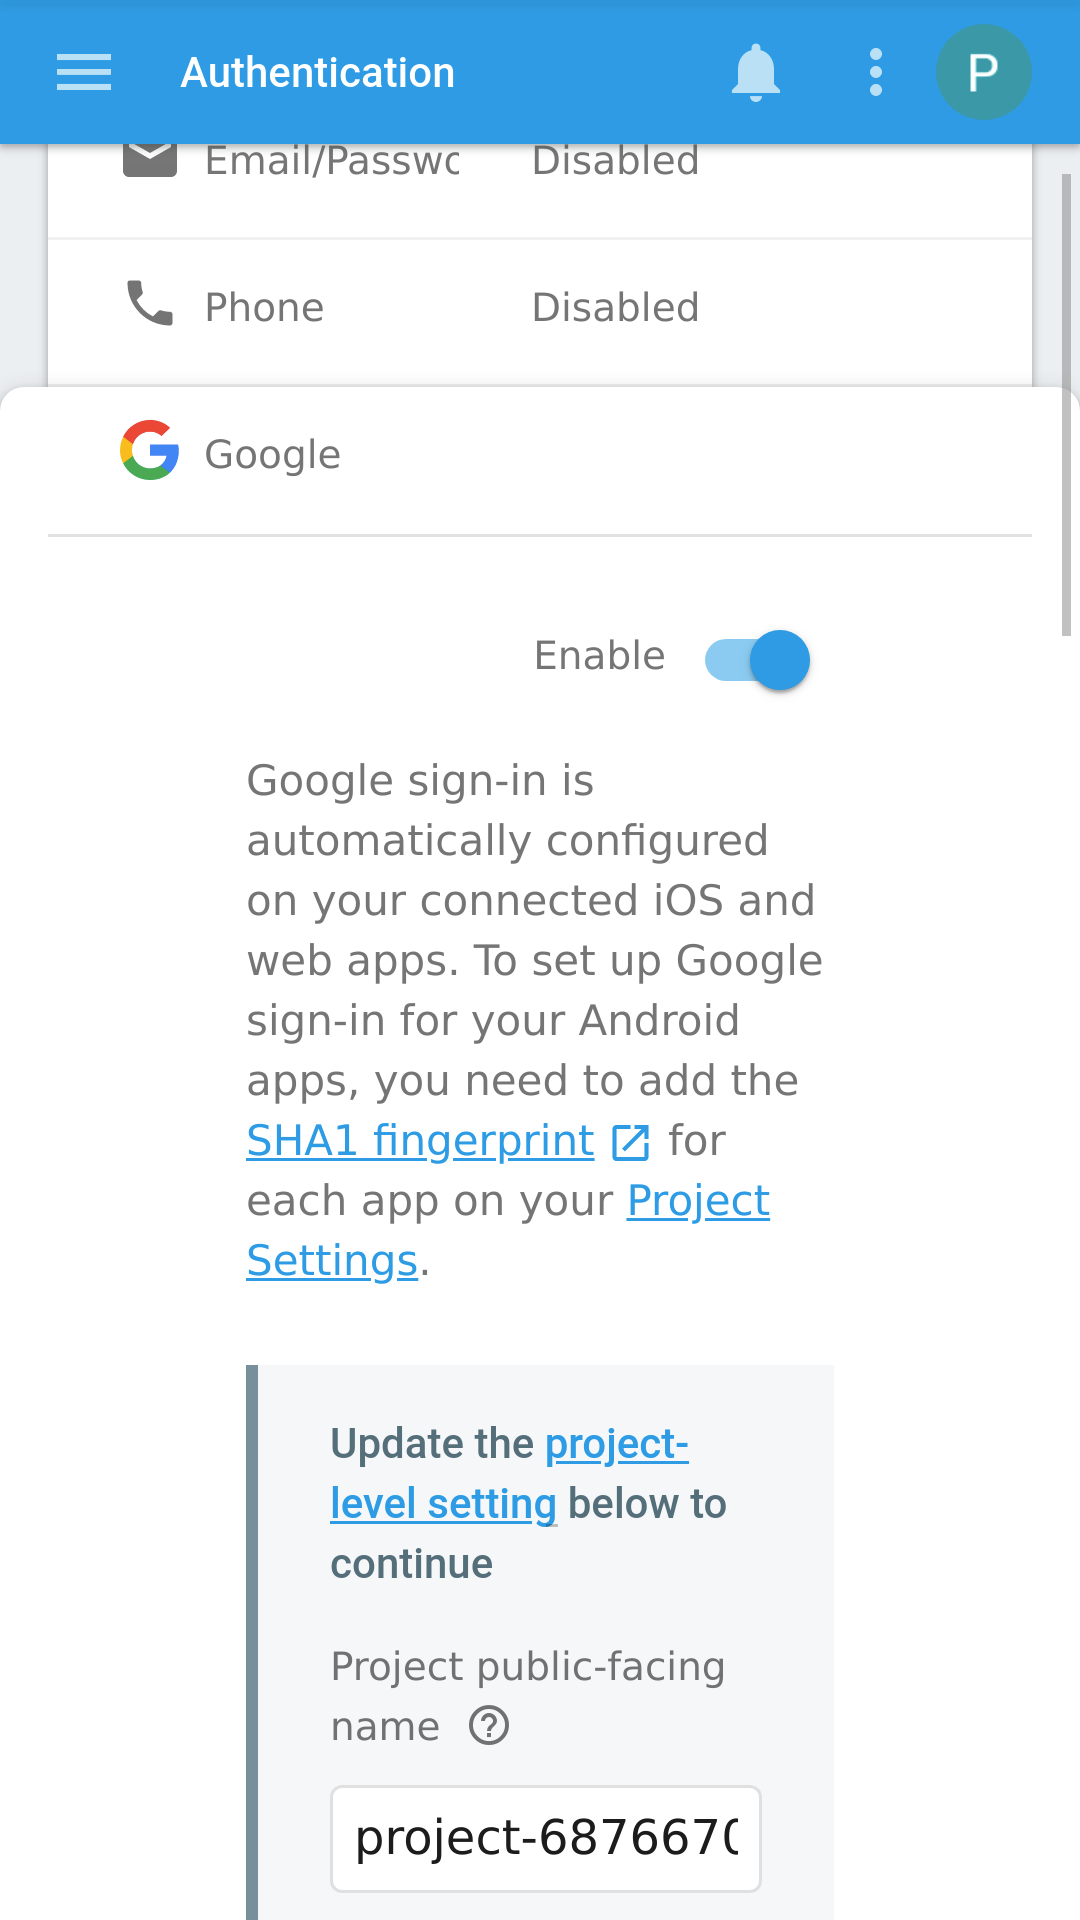 Firebase console: Add Google sign-in authentication - step 4